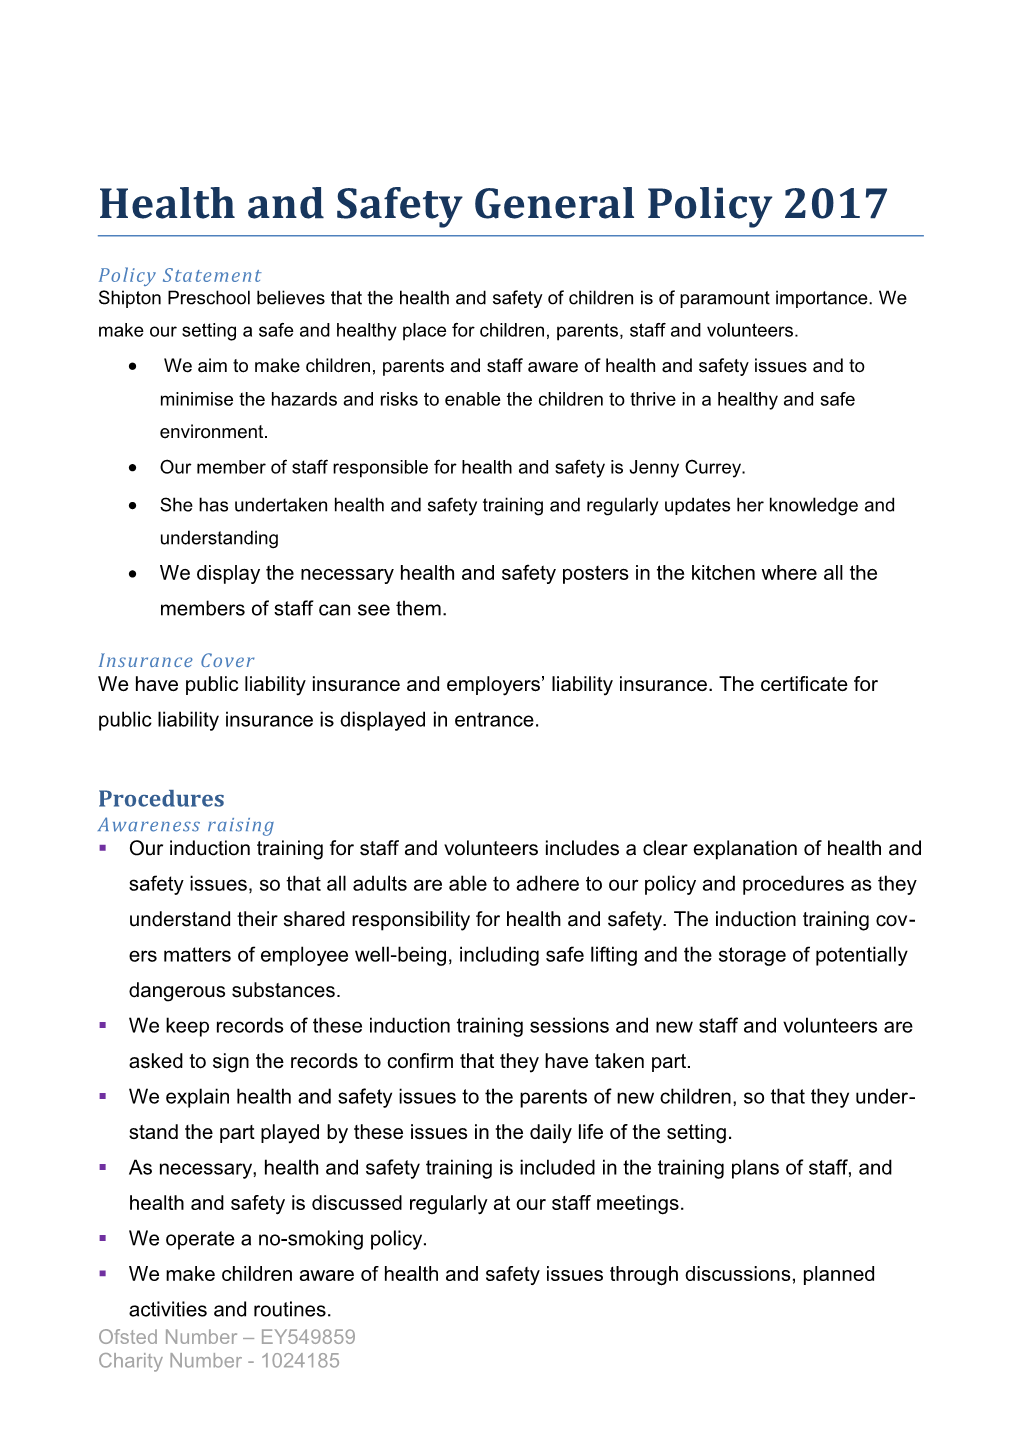 Health and Safety General Policy 2017